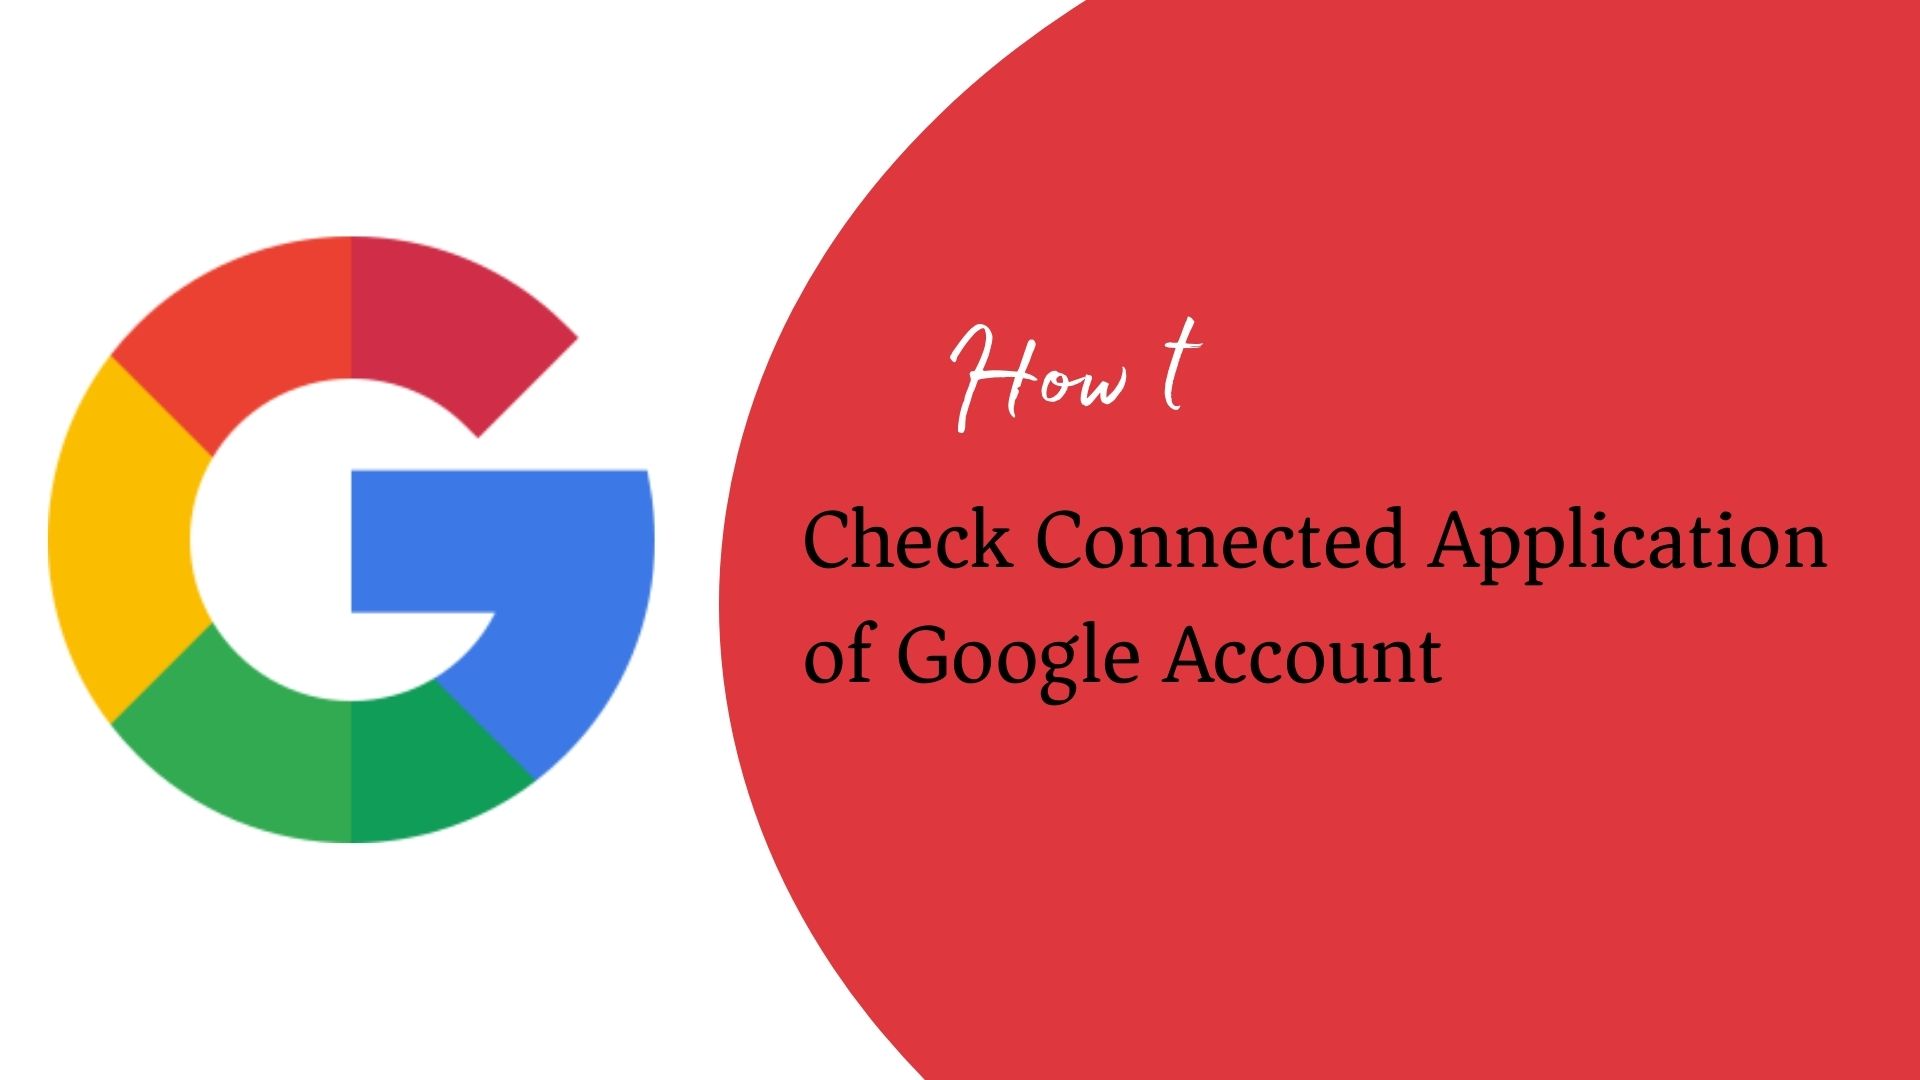 How to Check Connected Application of Google Account